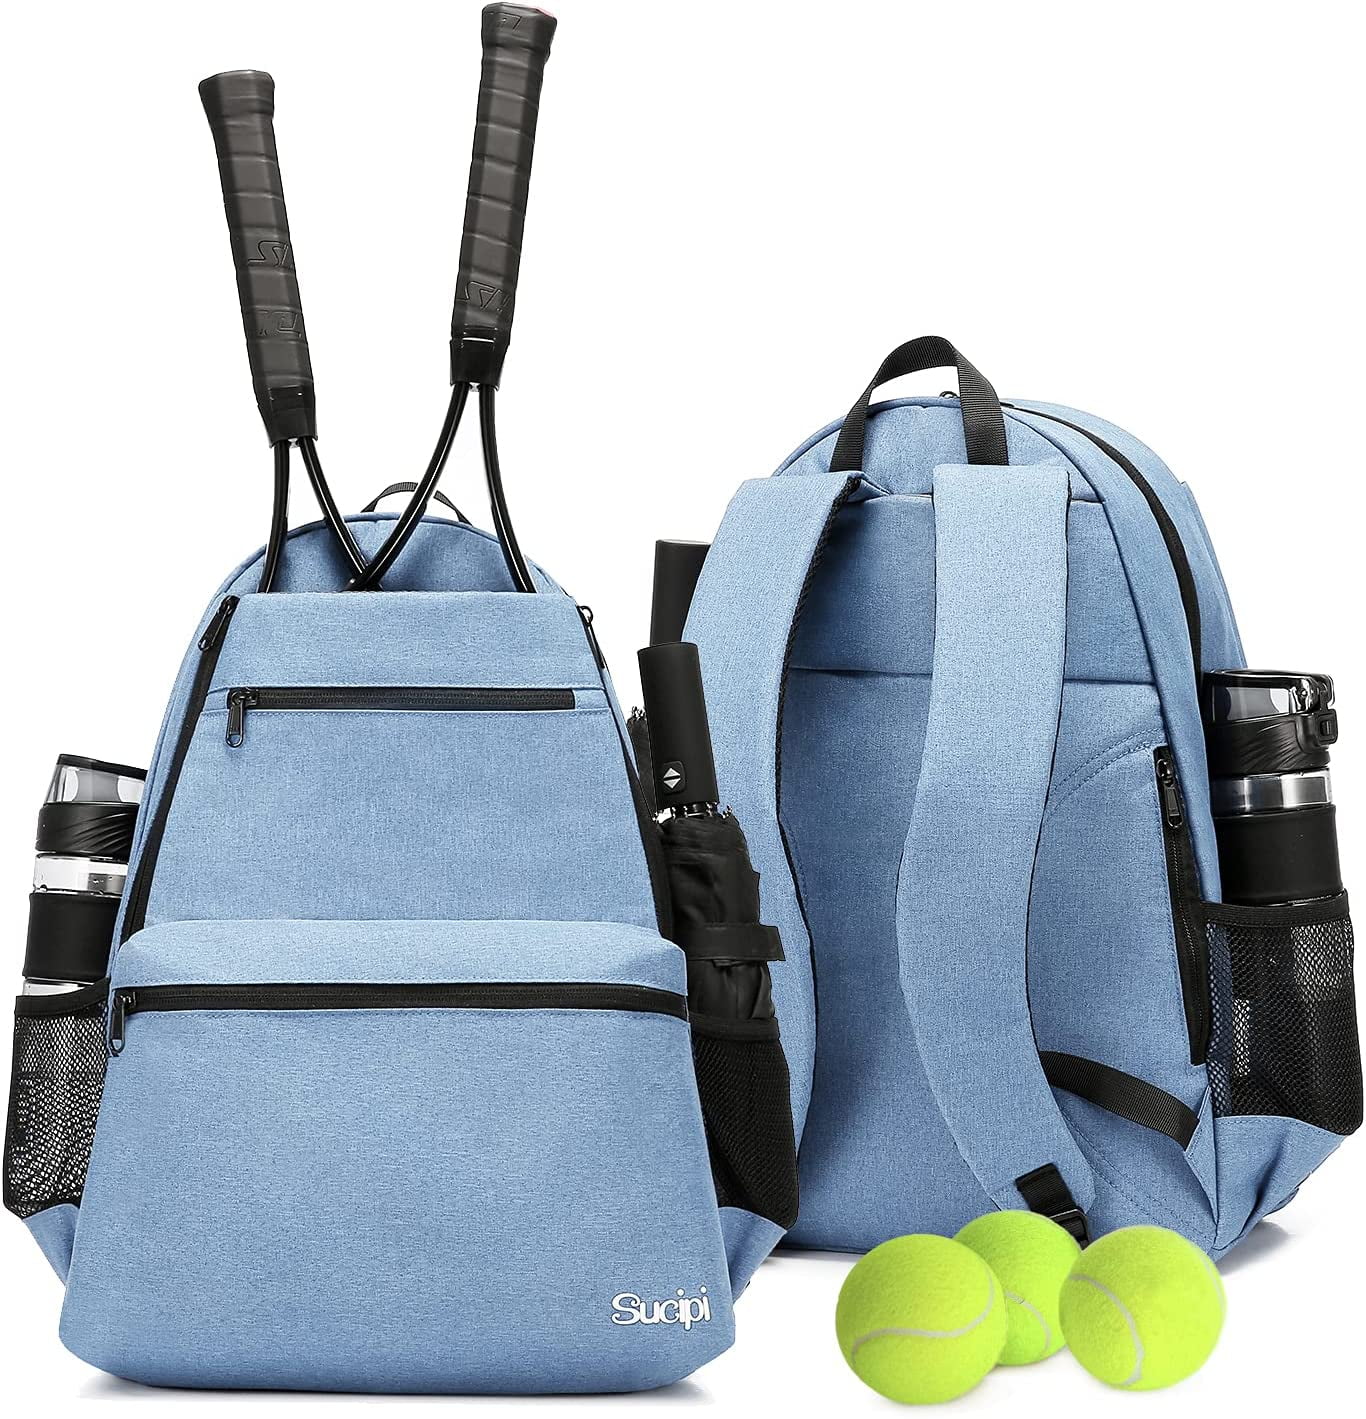 Sucipi Tennis Bag for Men and Women, Professional Tennis Backpack ...